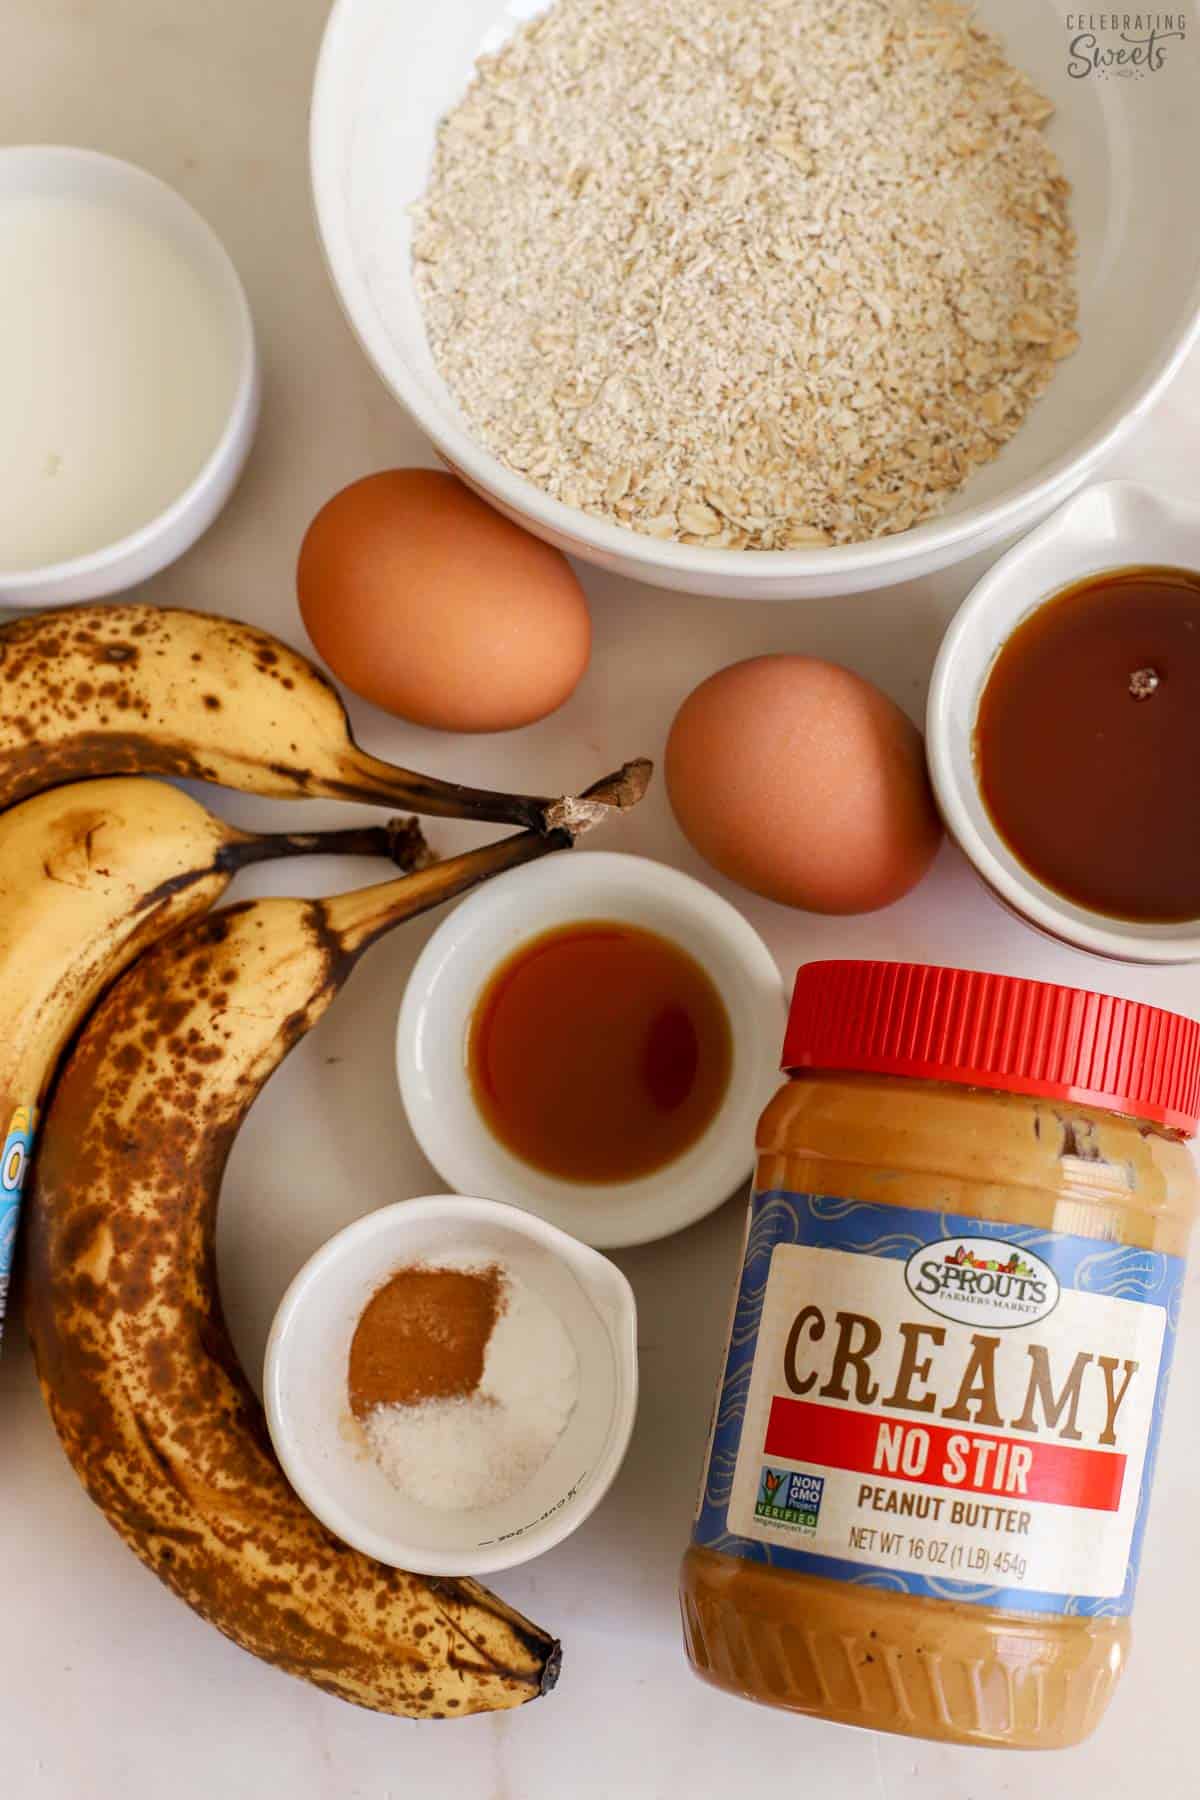 Ingredients for banana oatmeal muffins (bananas, peanut butter, oats, baking powder, maple syrup, eggs, milk).